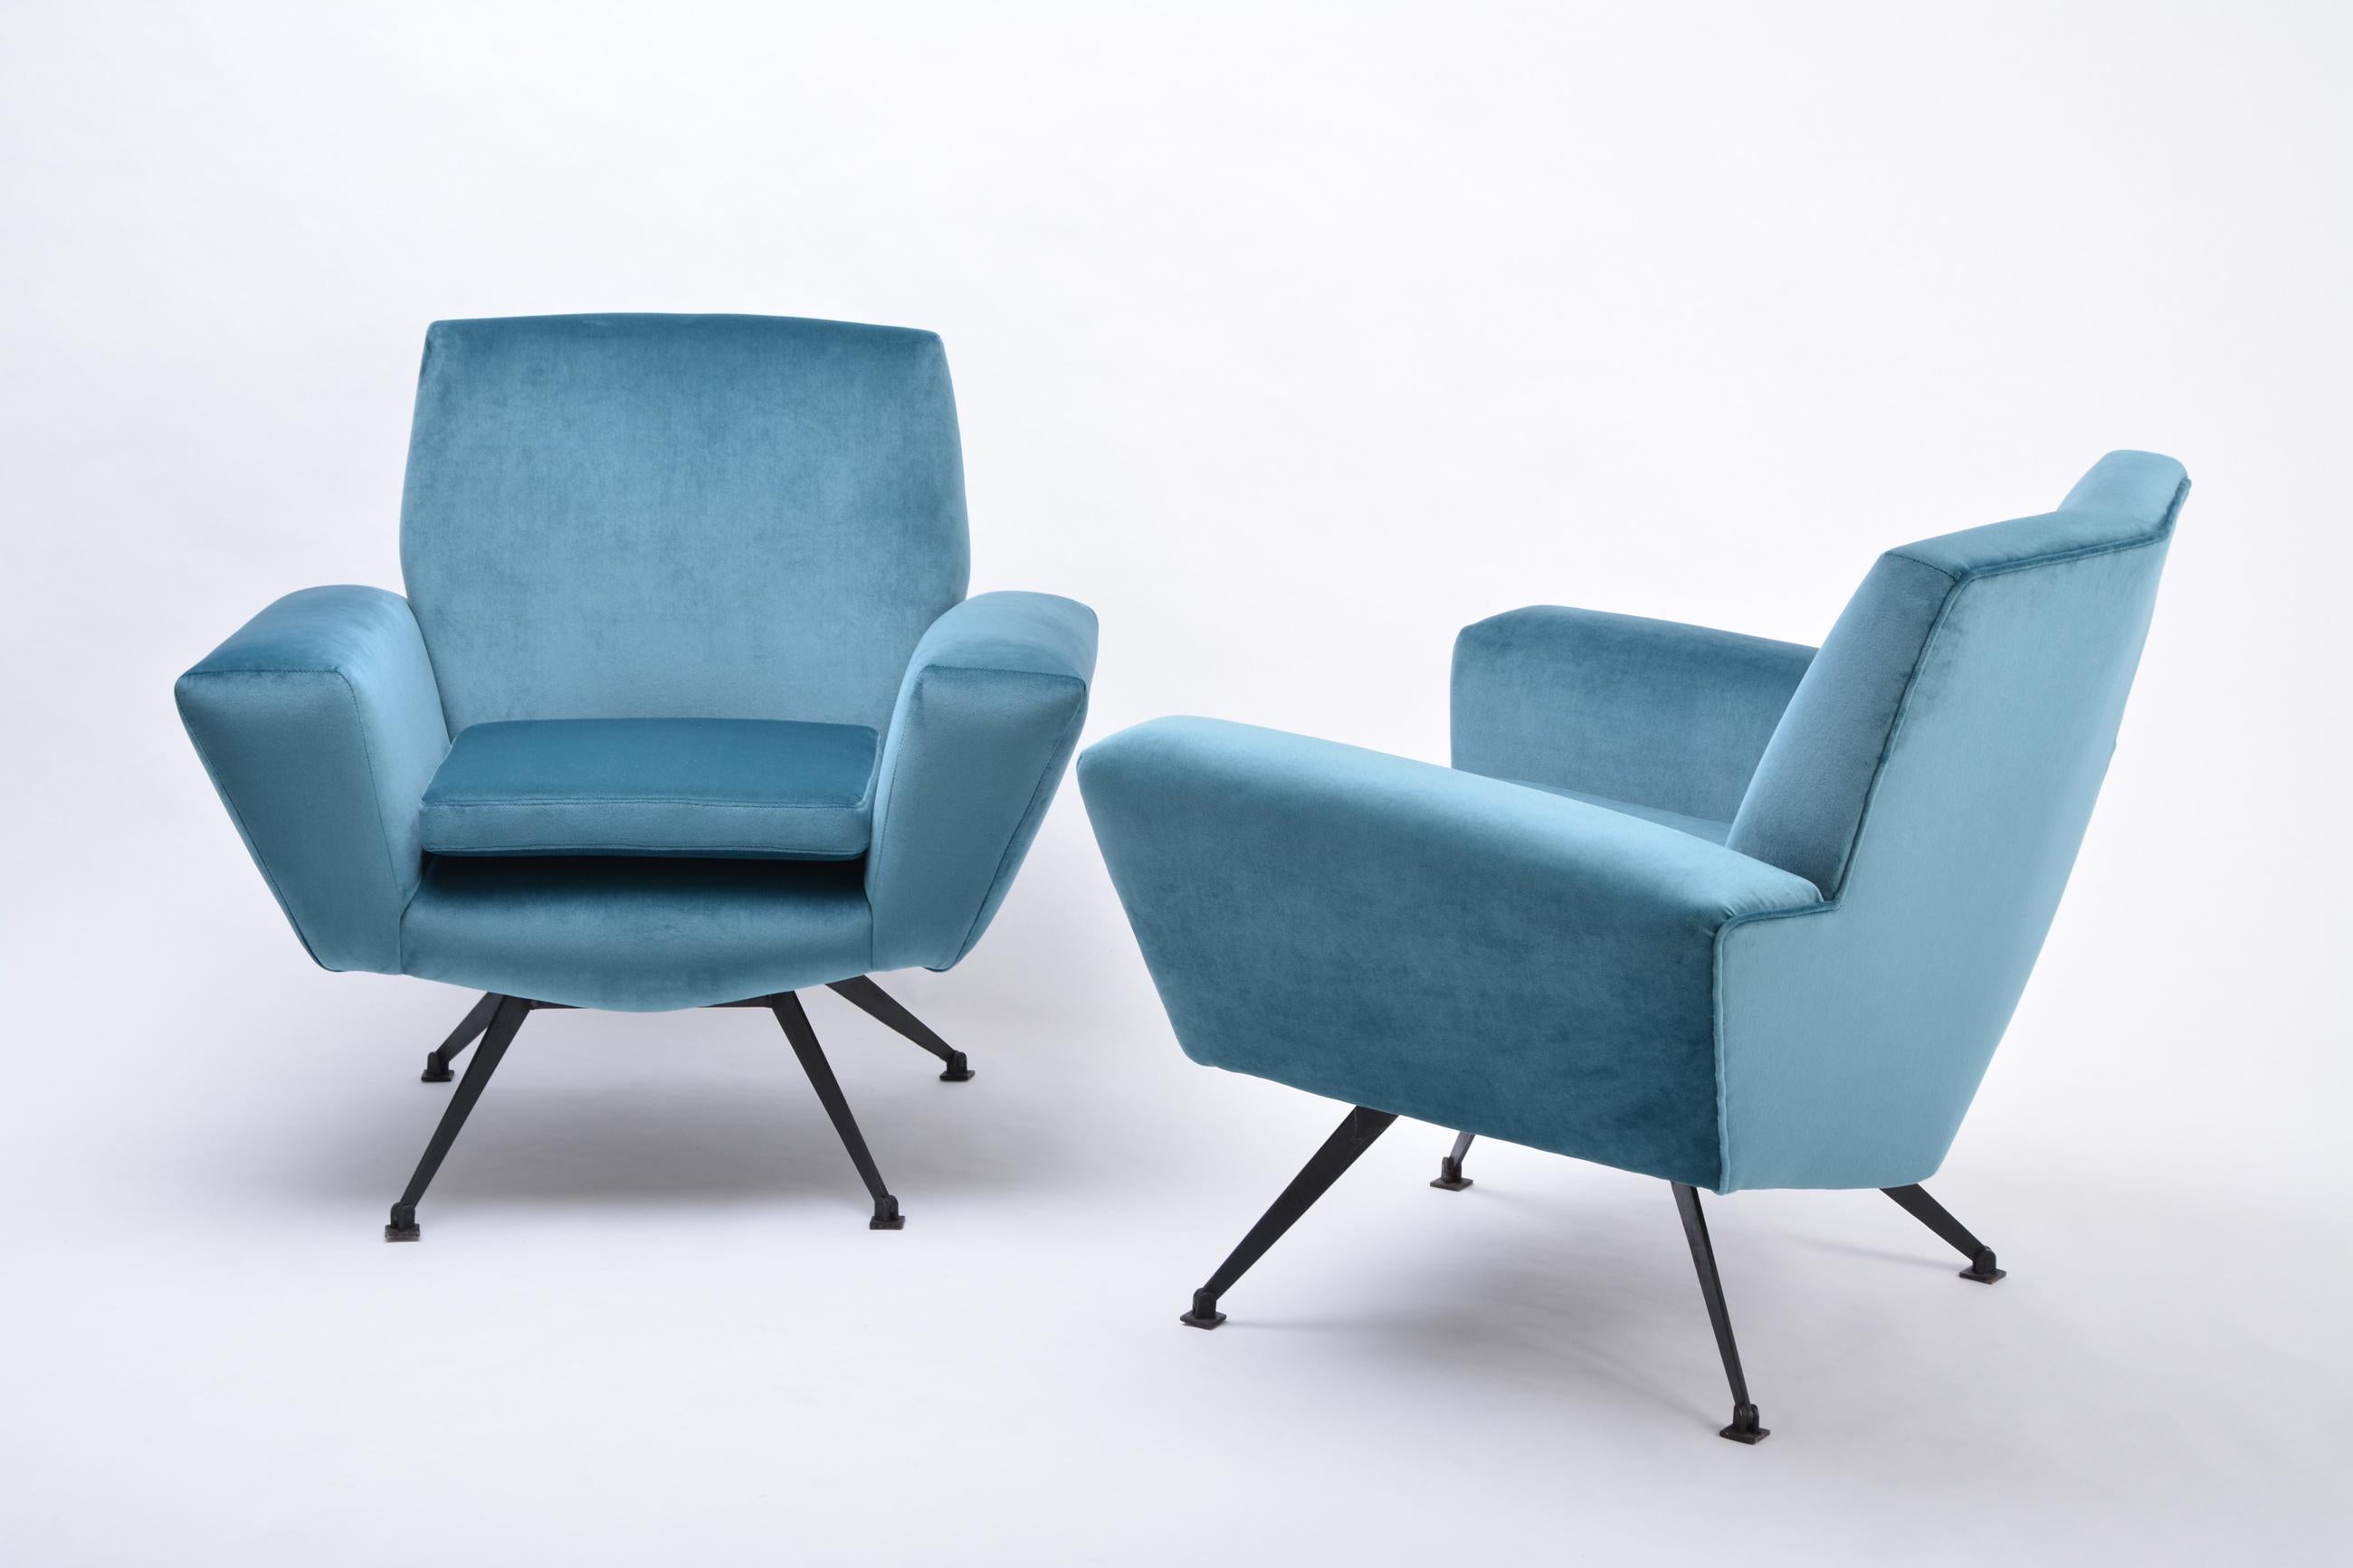 Set of Two Blue Reupholstered Italian Mid-Century Modern Lounge Chairs by Lenzi 3